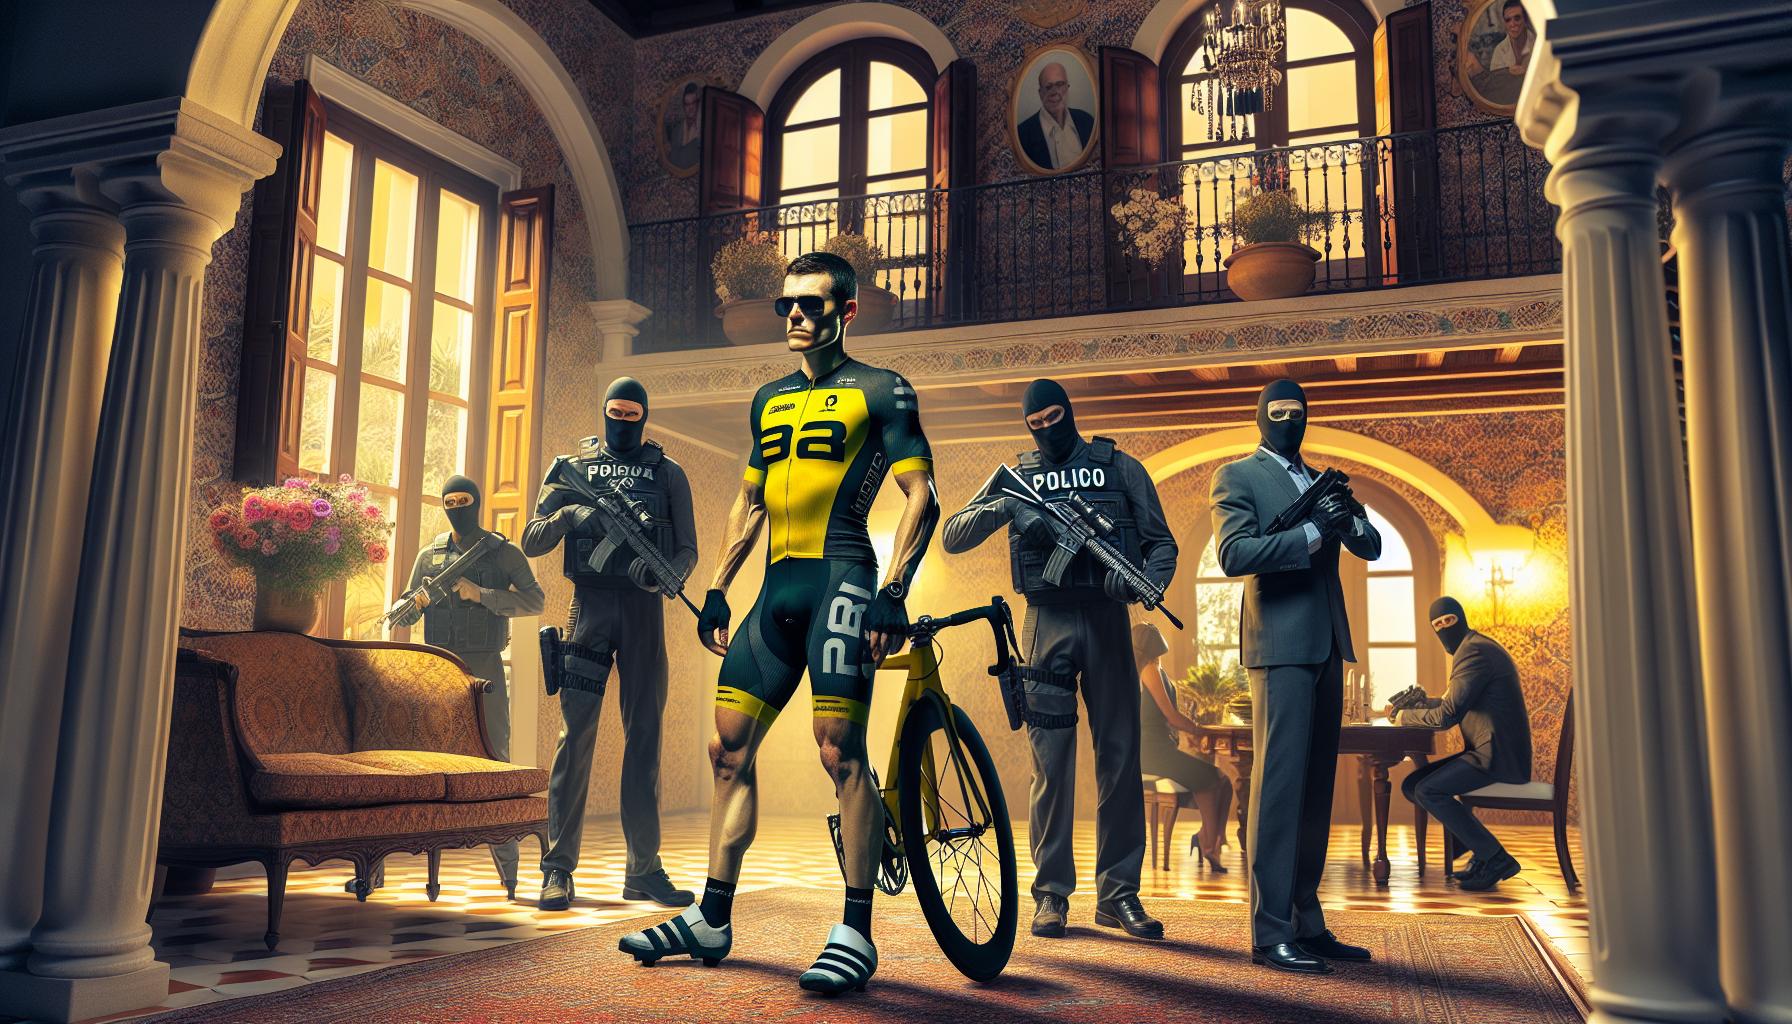 Athletes Still 'Gaming the System' Like Armstrong | FinOracle